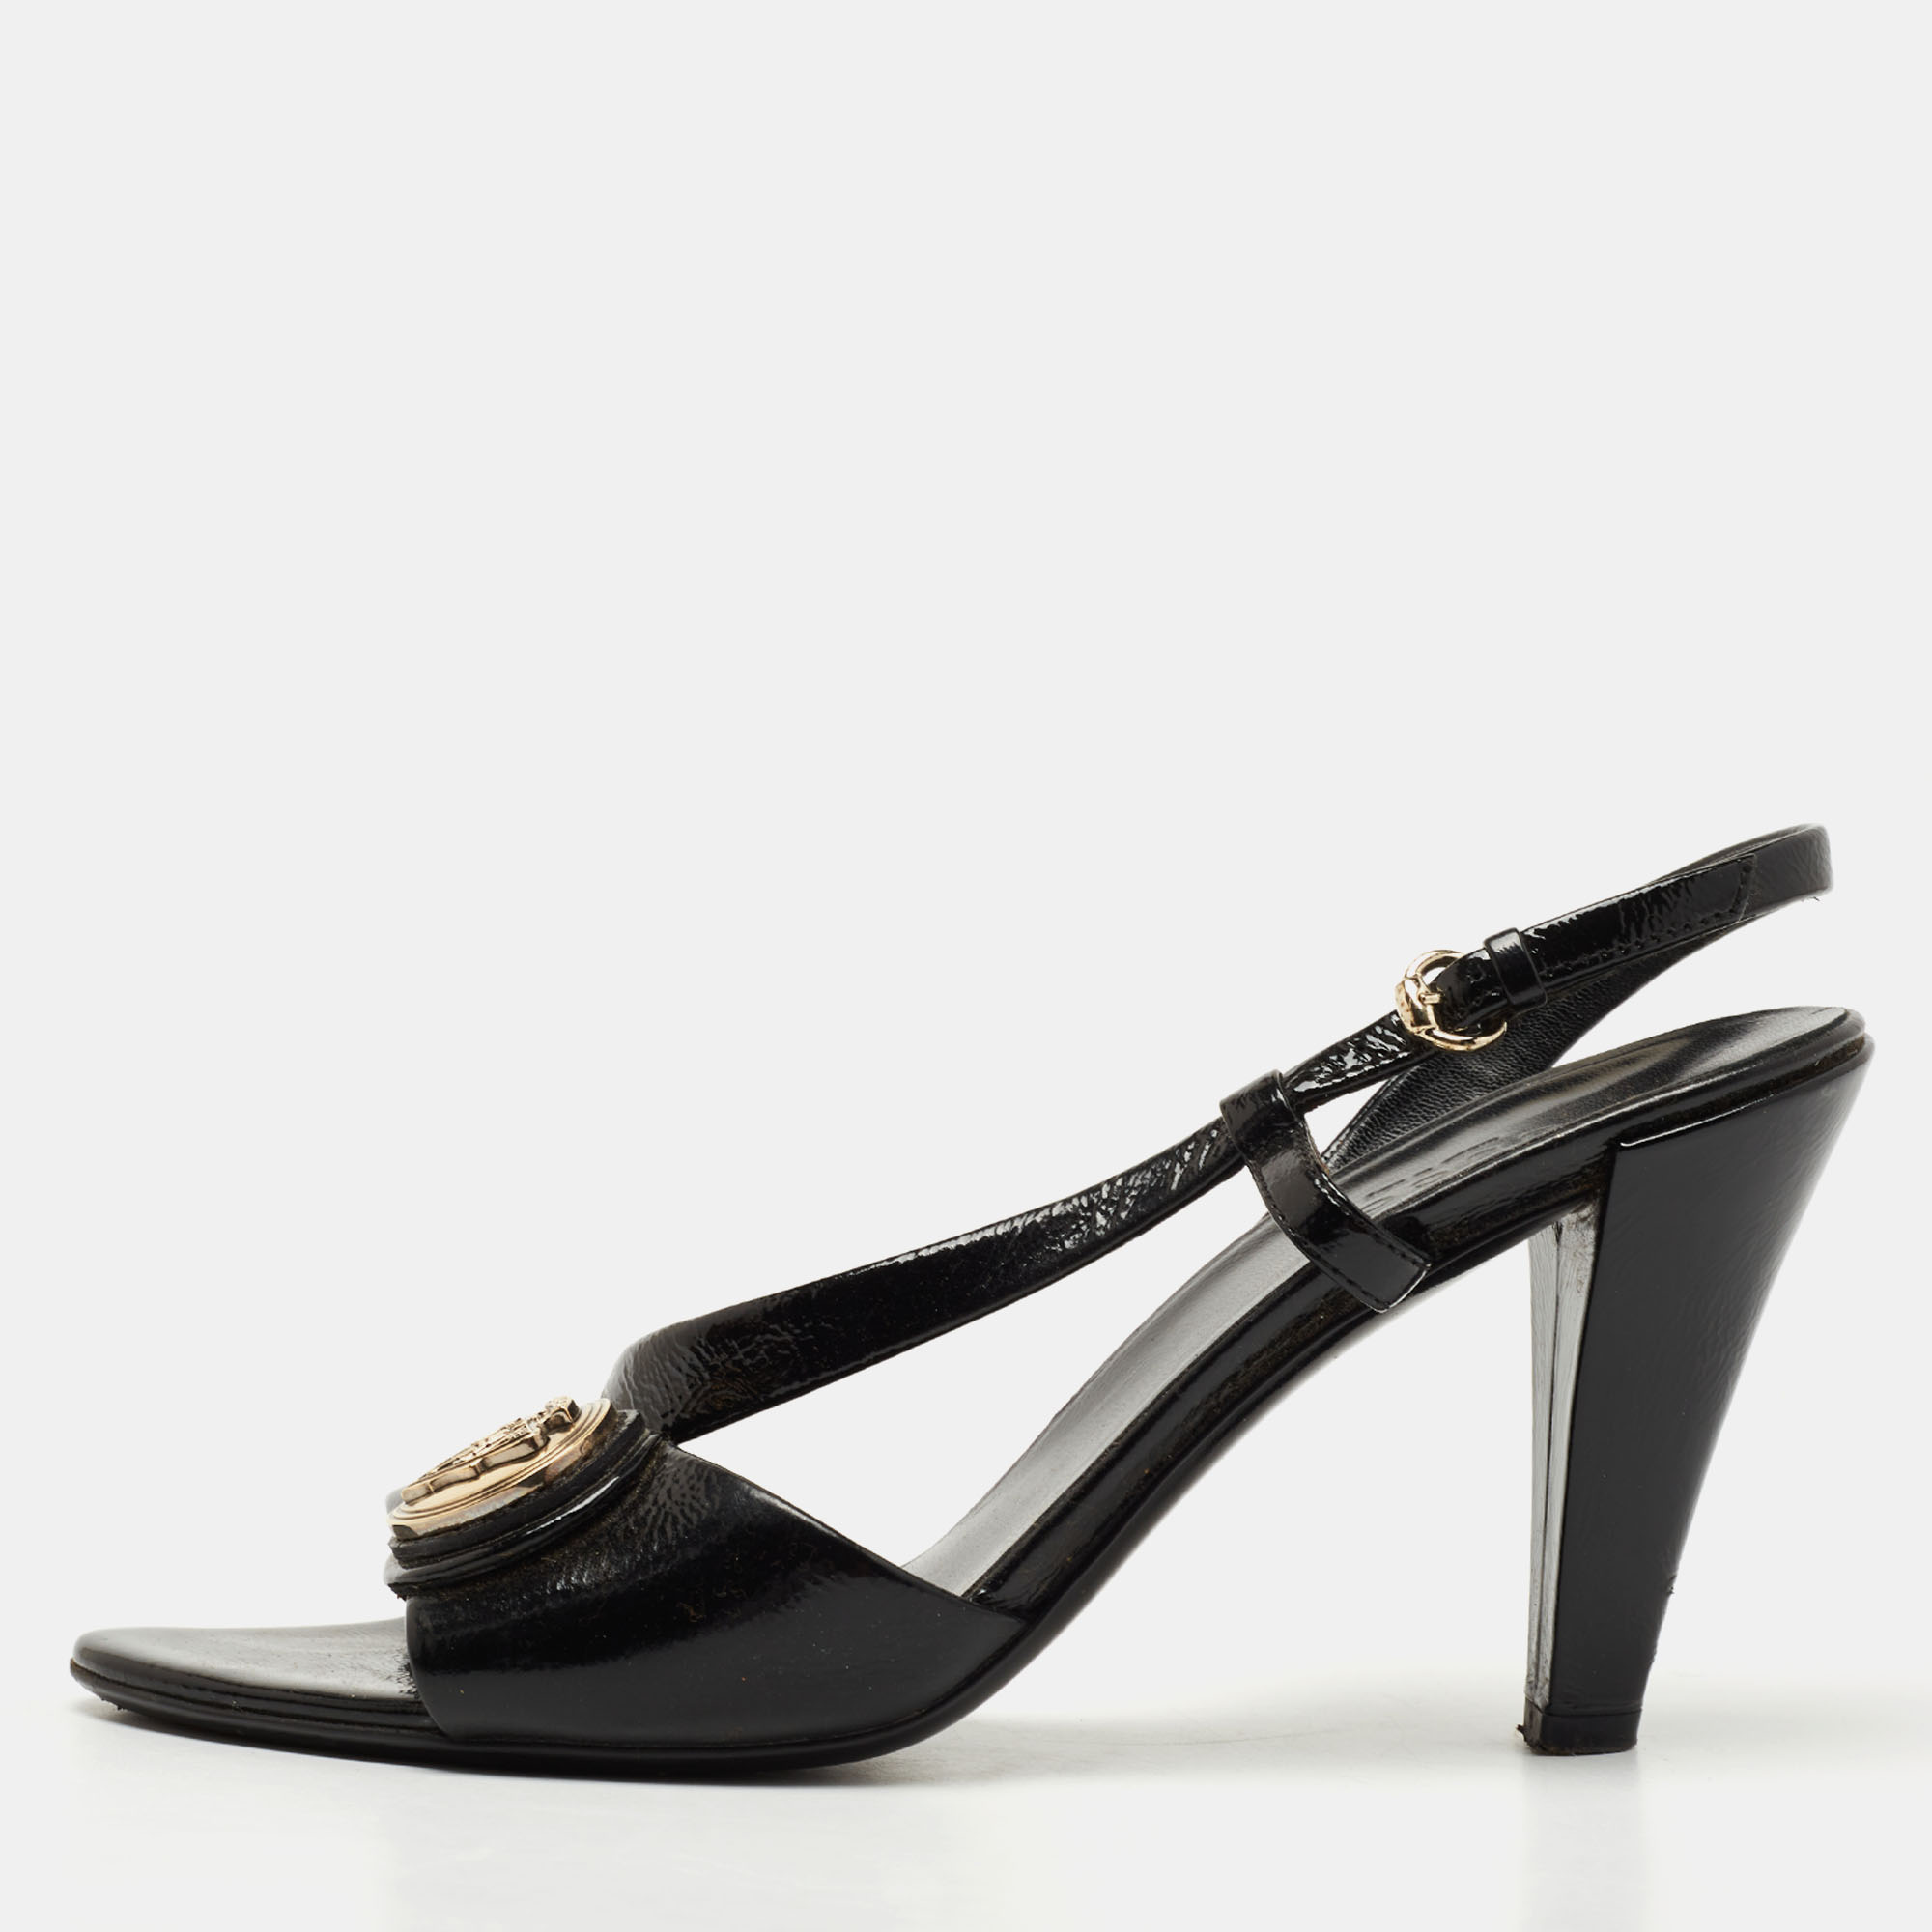 Gucci black patent leather hysteria slingback sandals size 36.5